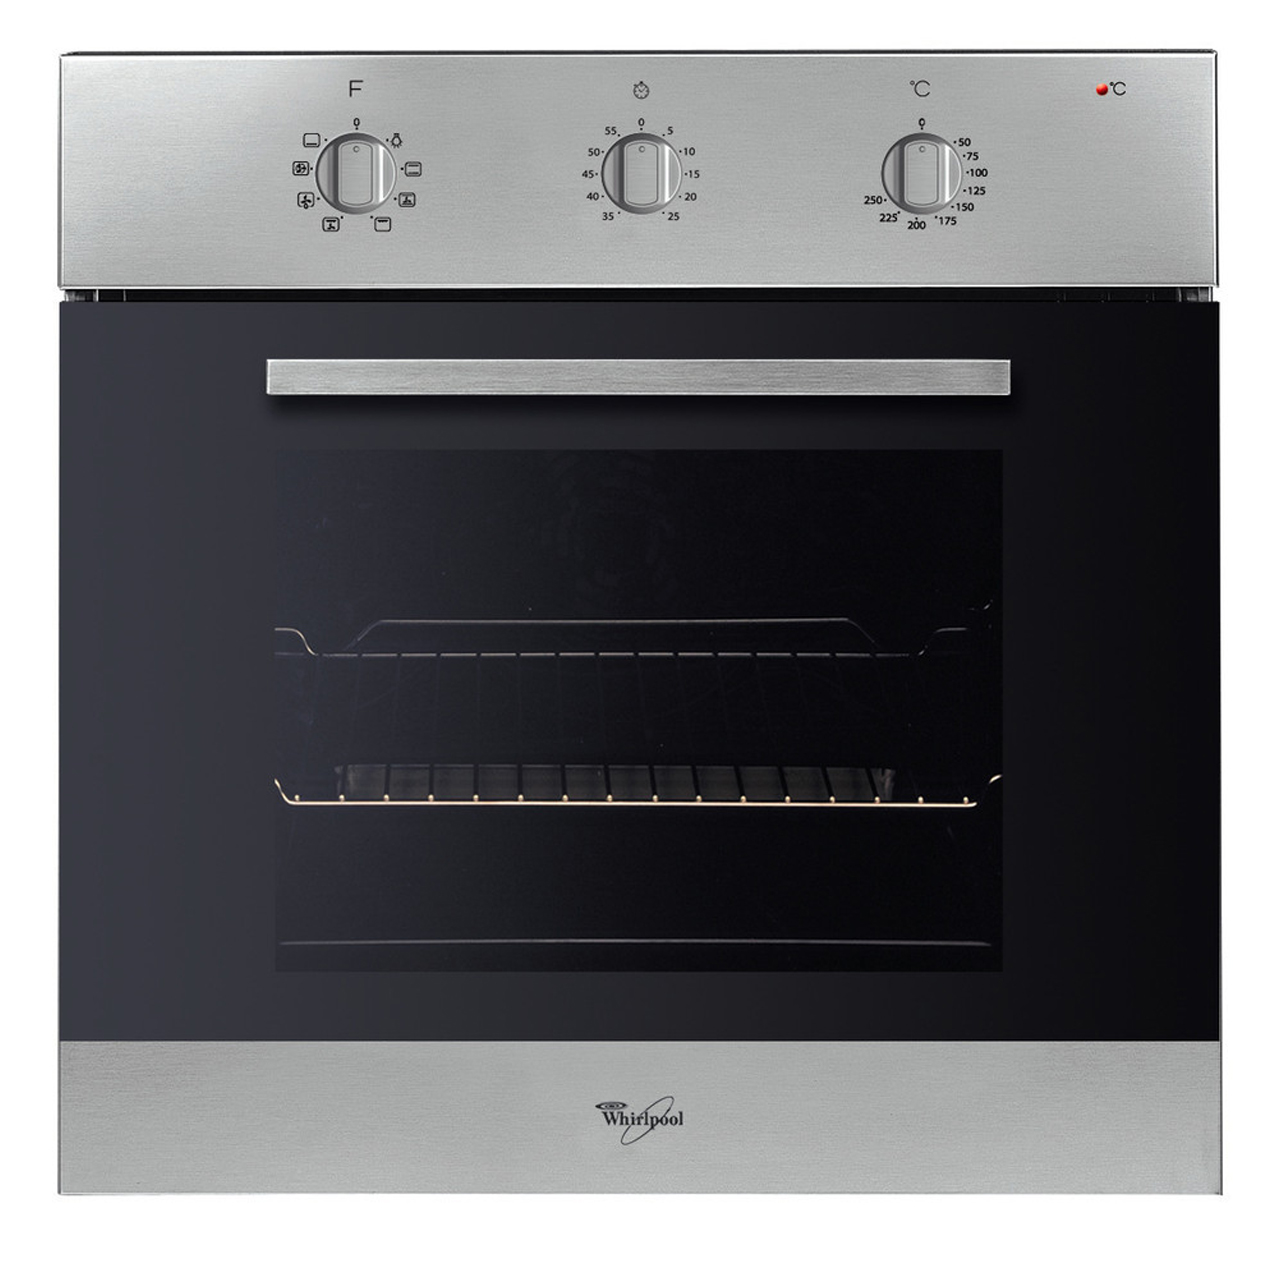 Whirlpool - Built - in Electric Oven - AKP459IX